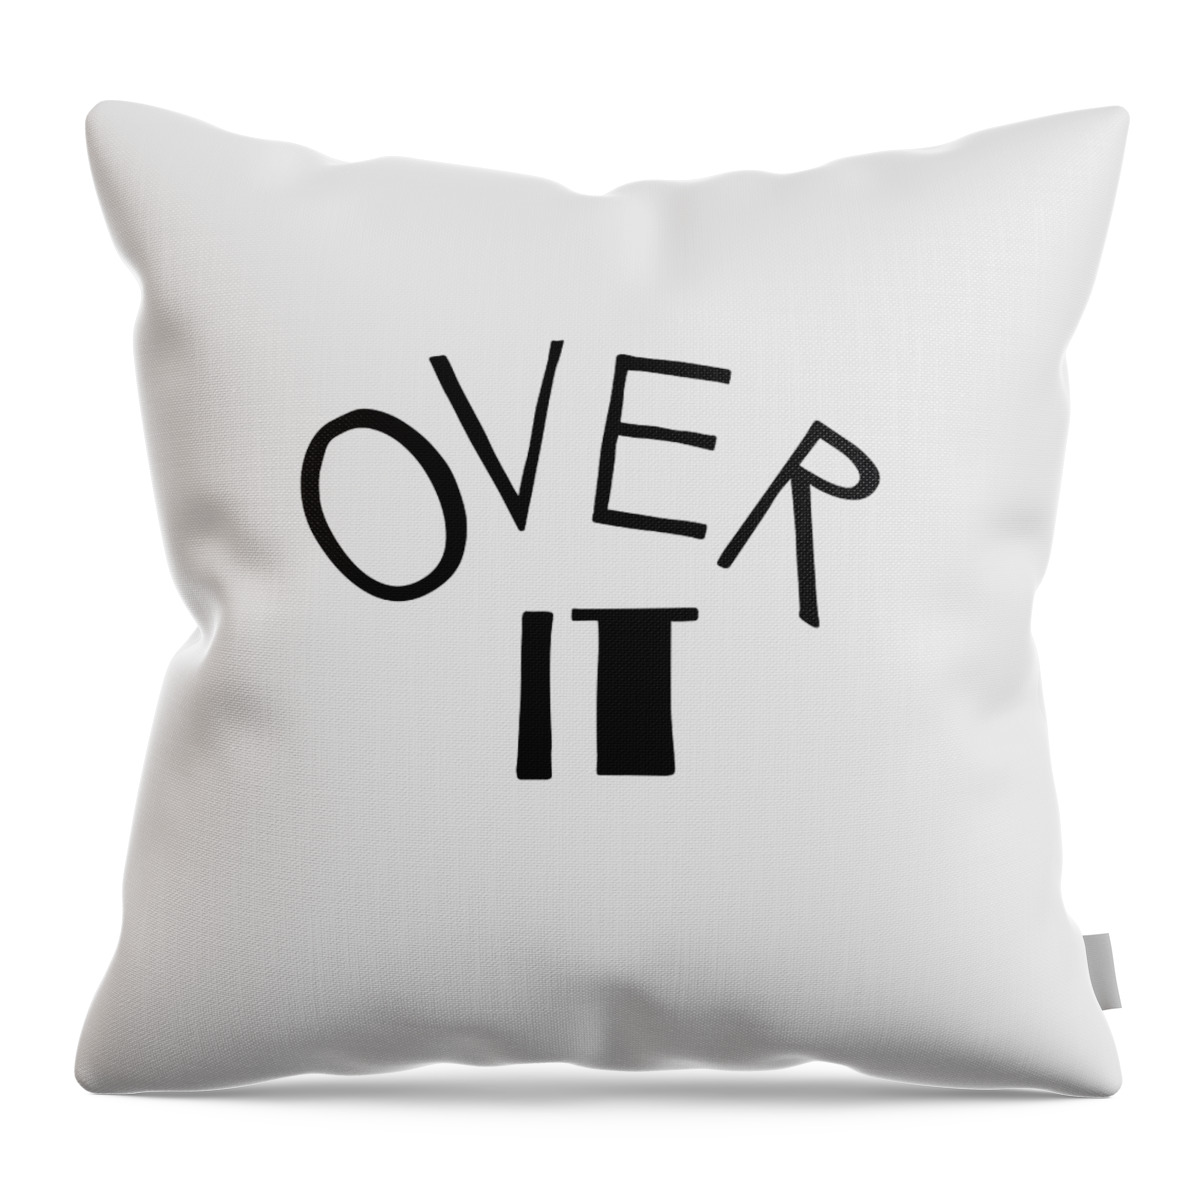 Over It Throw Pillow featuring the digital art Over it Typography by Christie Olstad by Christie Olstad